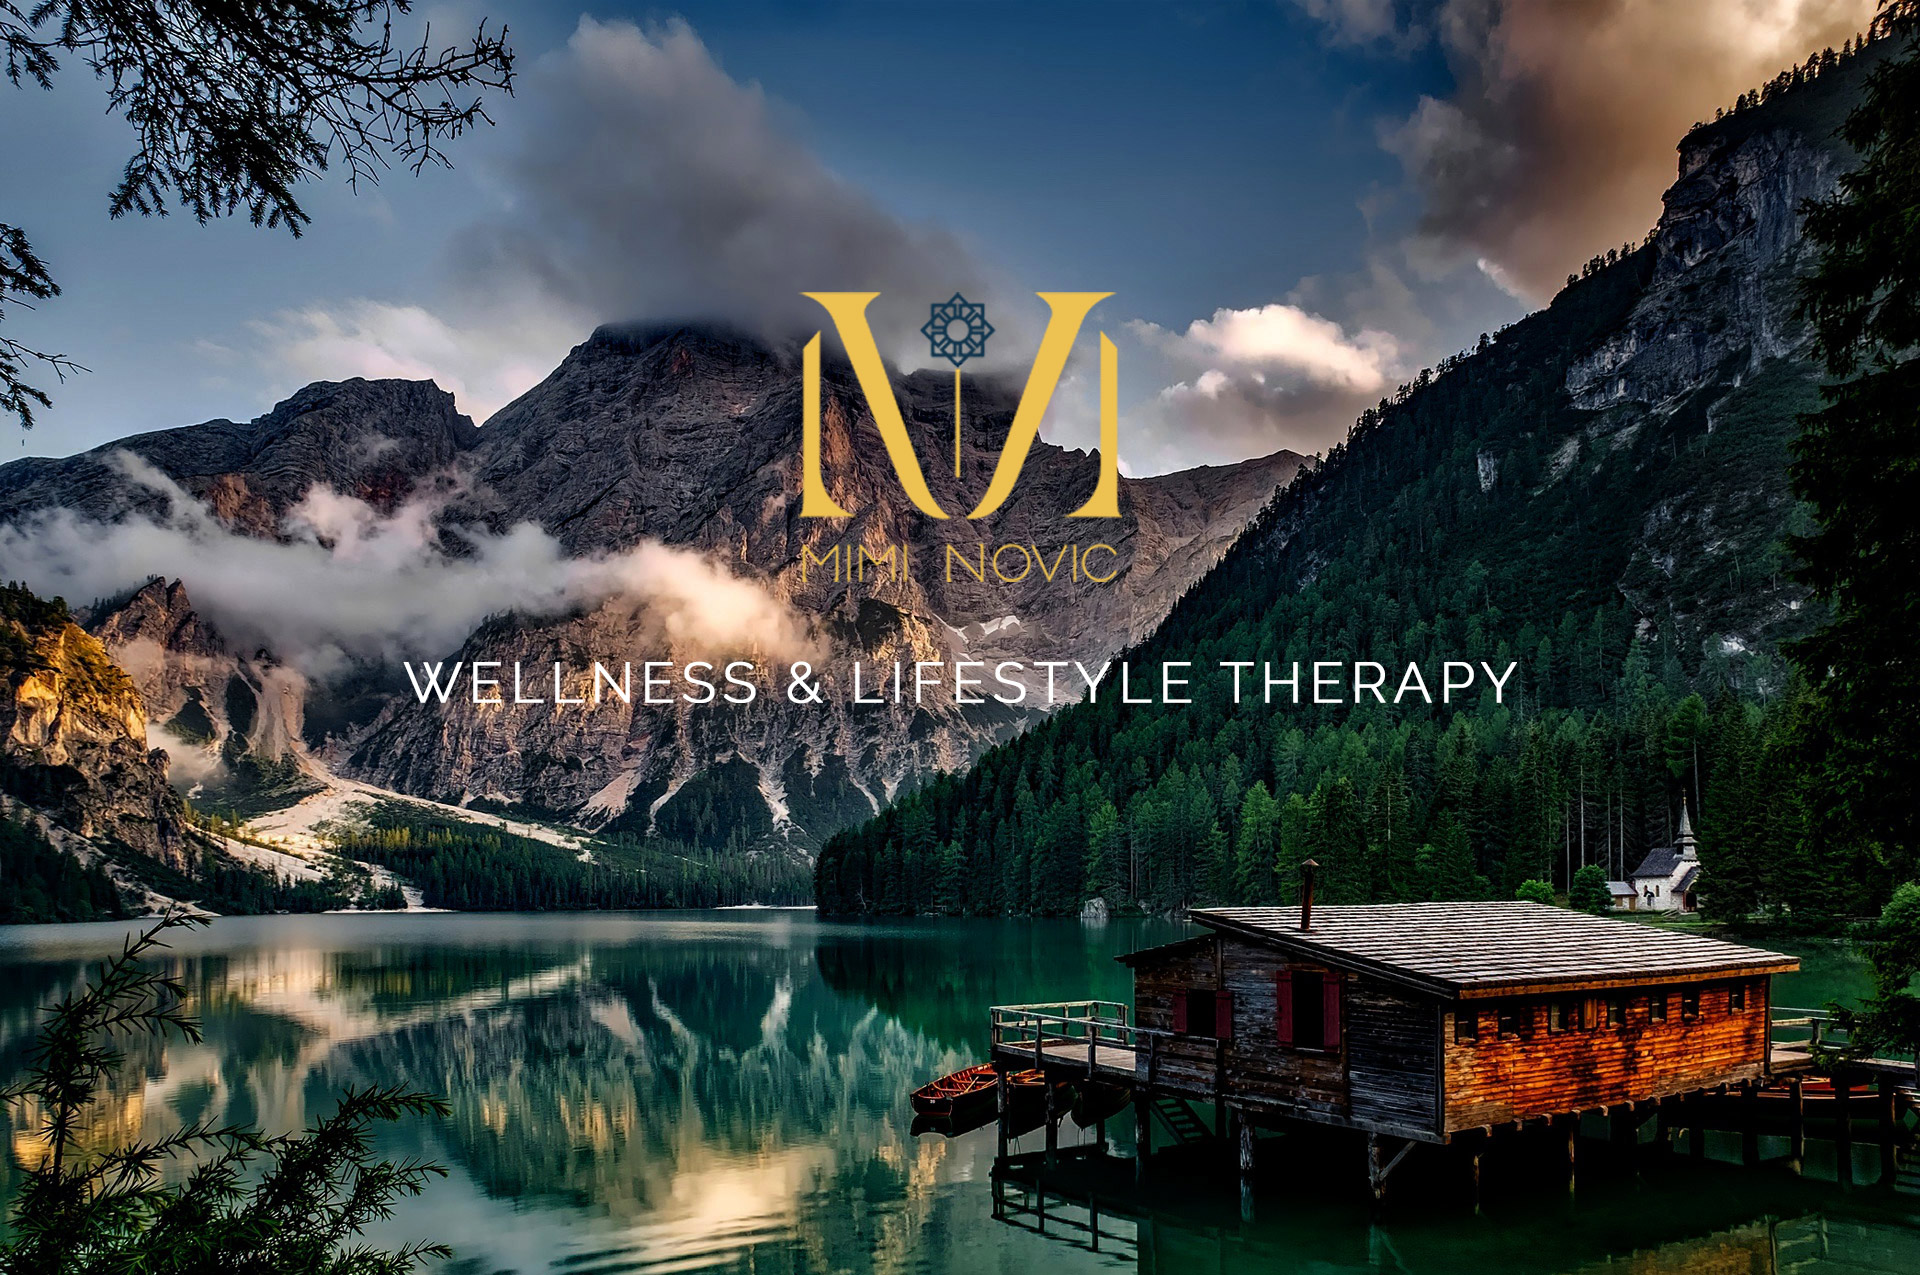 WELLNESS & LIFESTYLE THERAPY